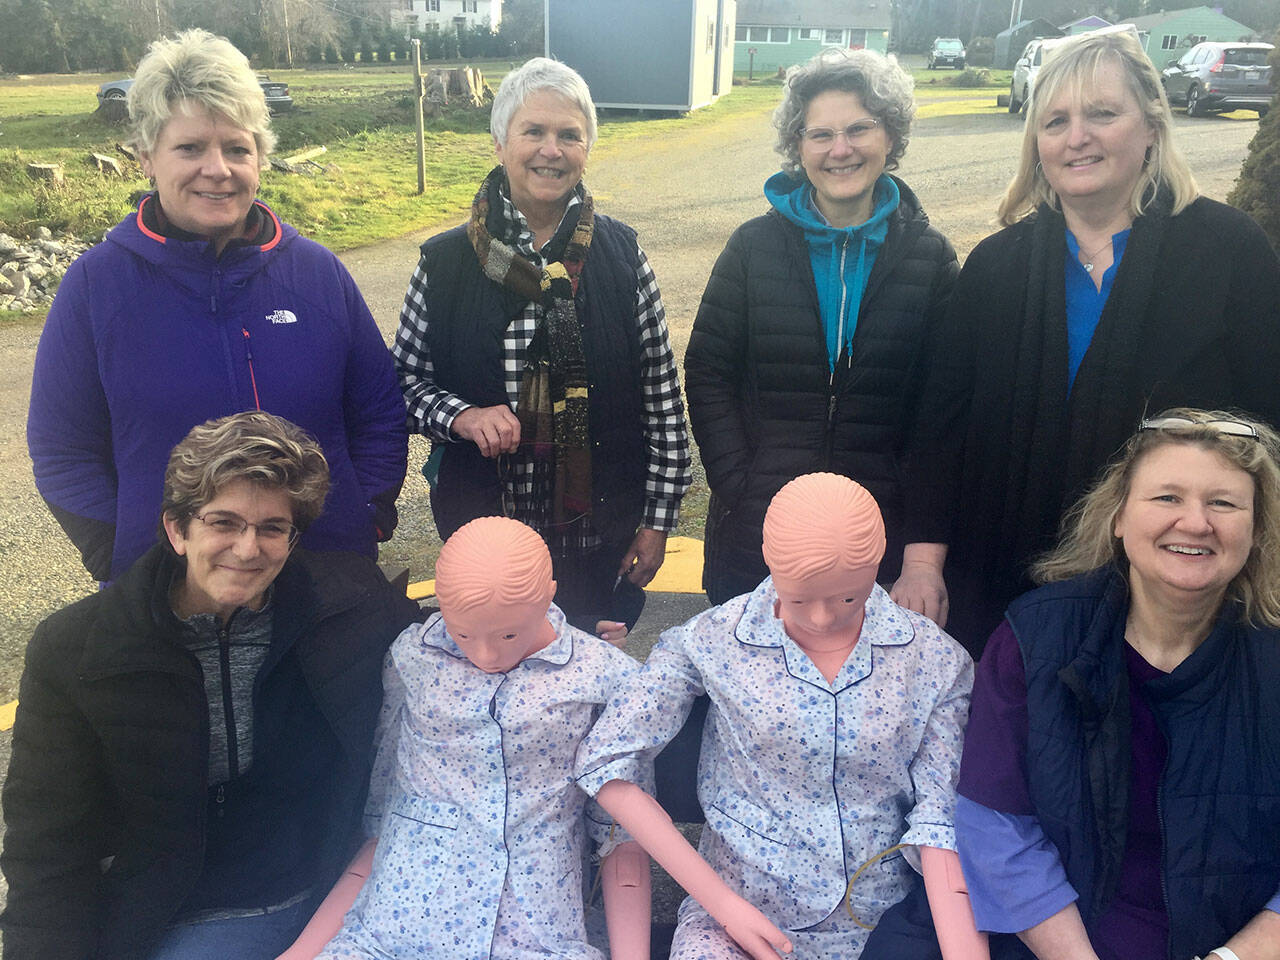 (Courtesy Photo) At a celebration last week, four HCA scholarship recipients, two of their trainers, and their training mannequins smiled for the camera. Top row left to right: Monica Dally, Sissel Johannessen (trainer), Stacey Wolczko, Chris Jovanovich (trainer). Bottom row left to right: Aimee Aiken, mannequins Thelma and Louise, and Holly Allingham. Two other students were not available as they were with clients.